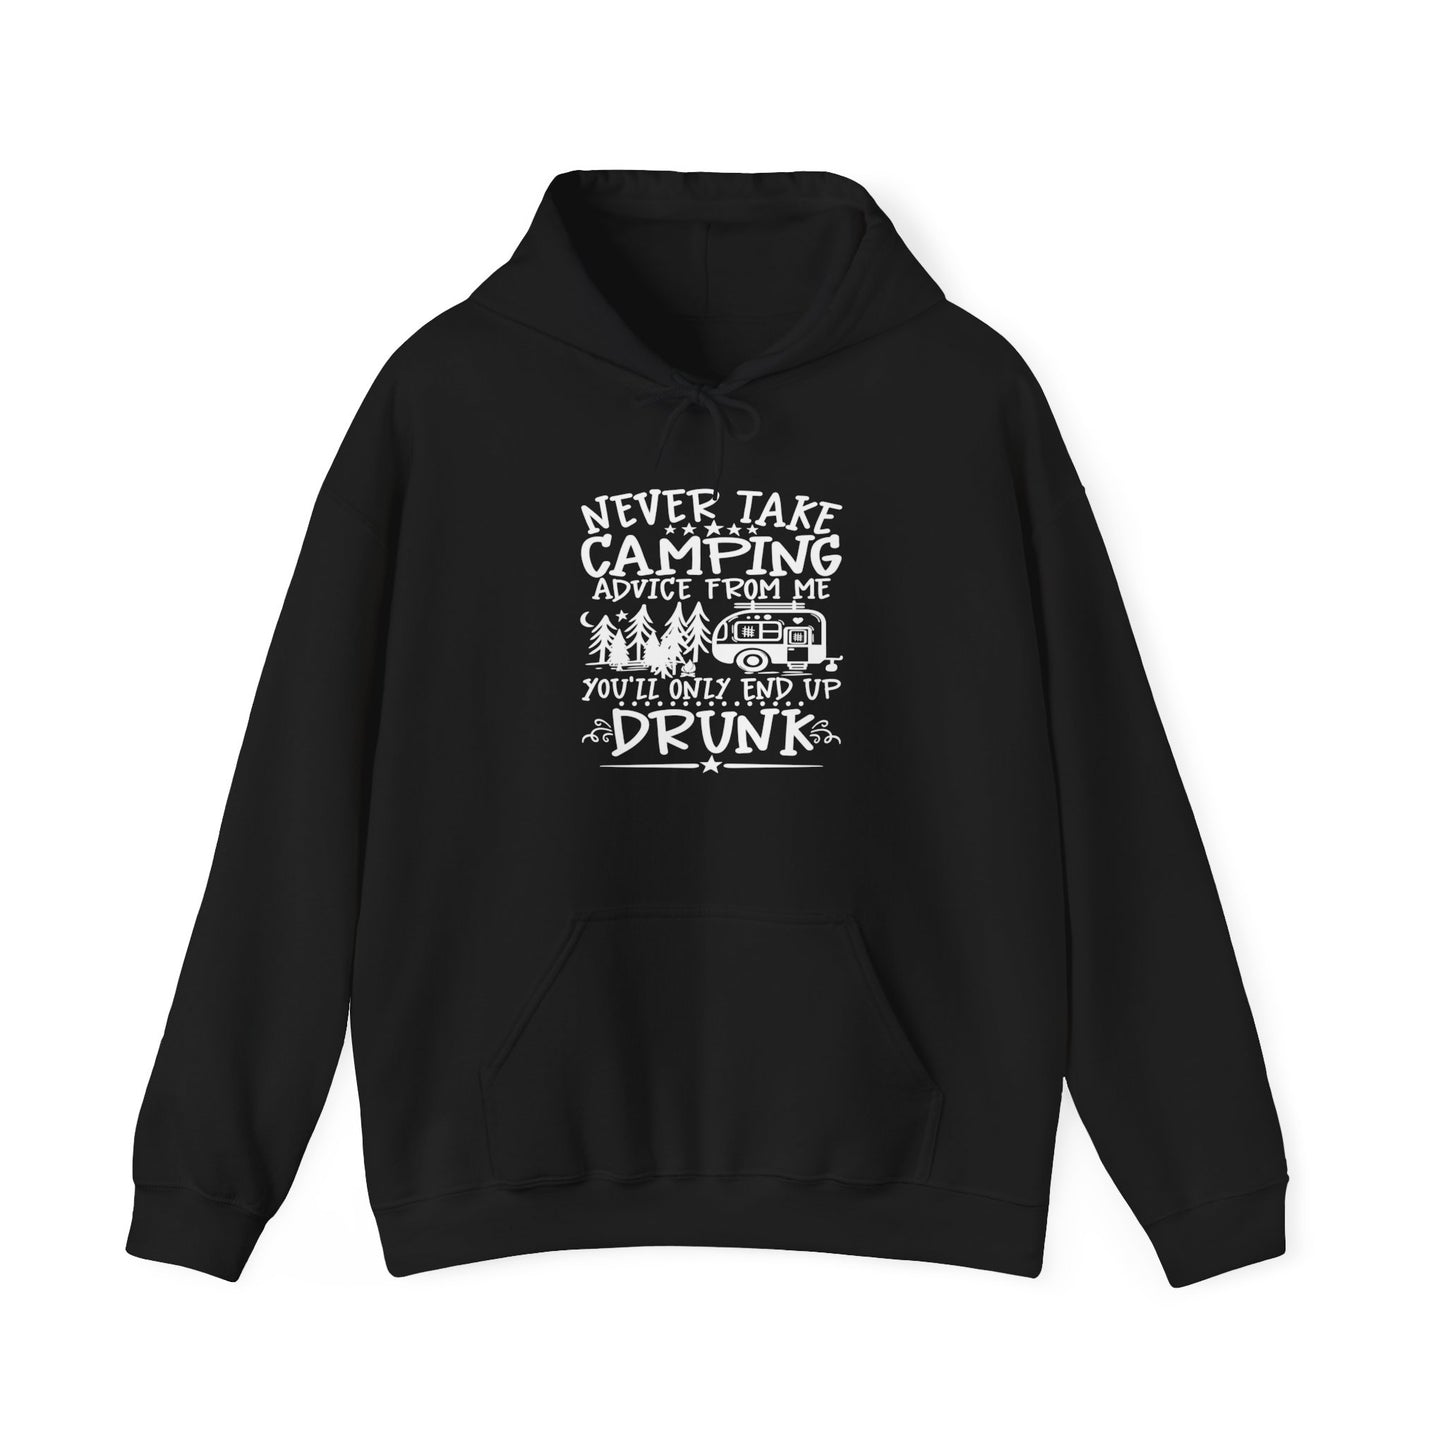 Never Take Camping Advice From Me You'll Only End Up Drunk in White - Hooded Sweatshirt S-5XL